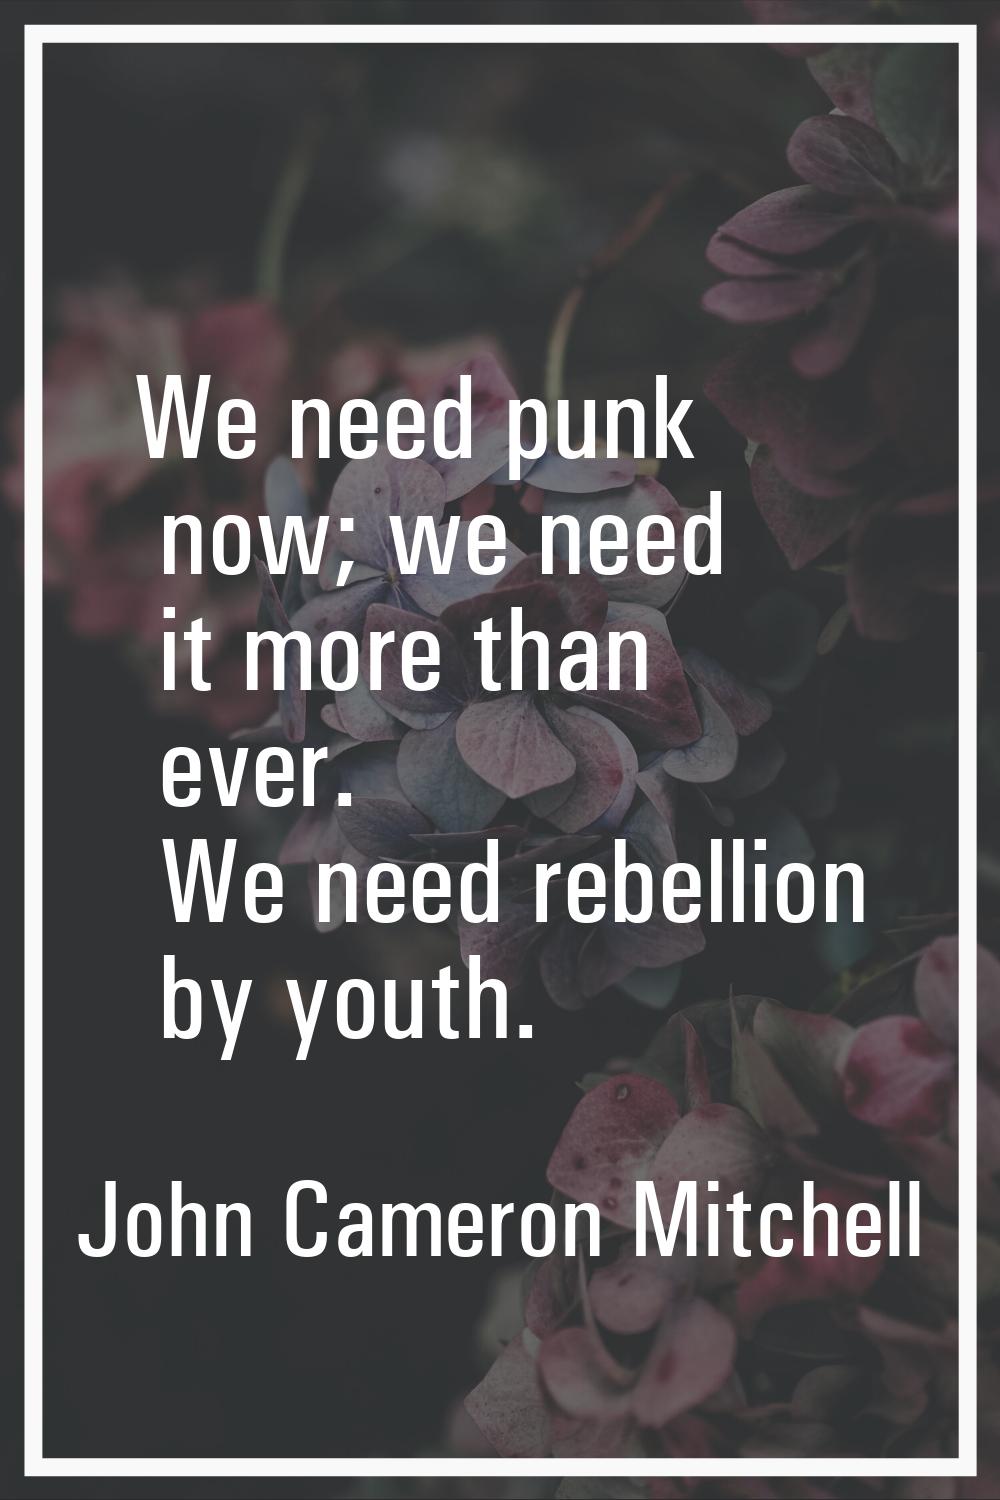 We need punk now; we need it more than ever. We need rebellion by youth.